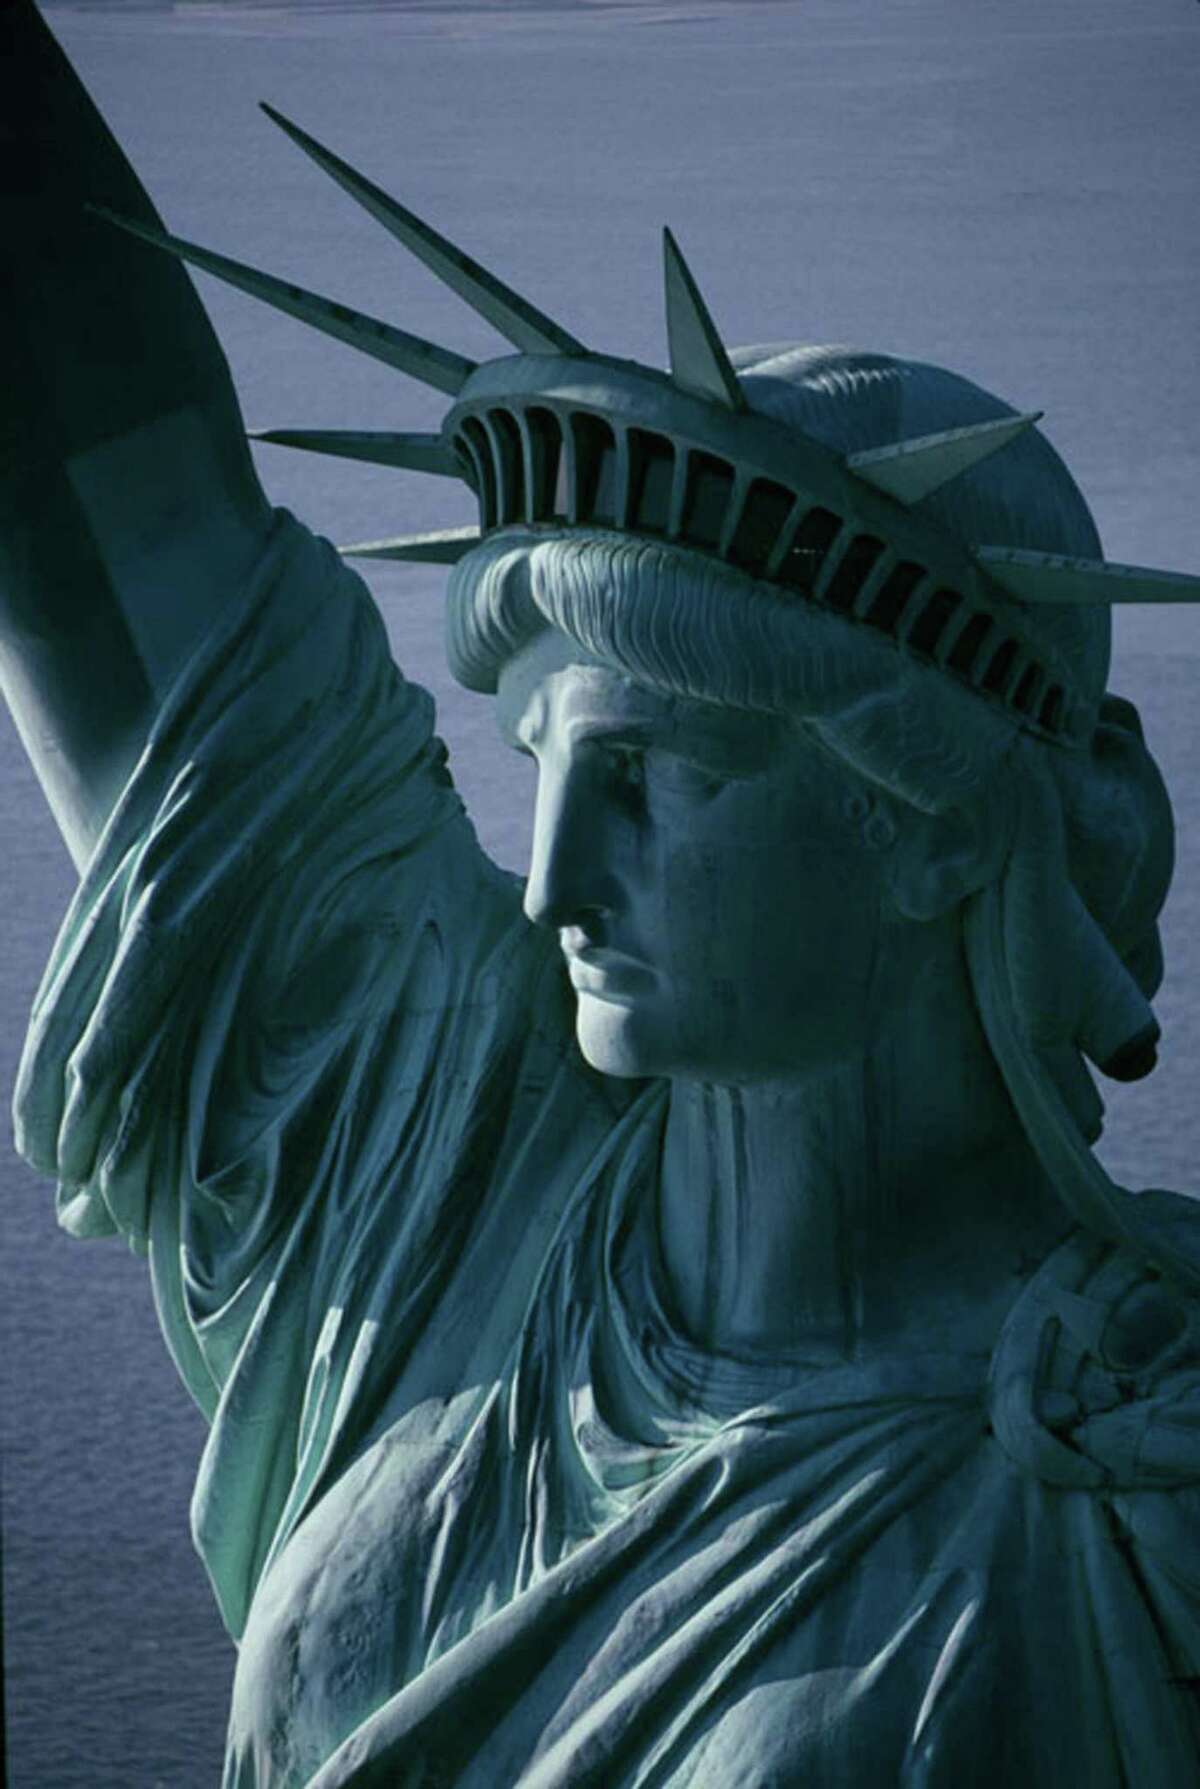 Image courtesy of http://www.statueofliberty.org Lady Liberty is the inspiration behind a new musical that will make its world premiere at the Warner Theatre.